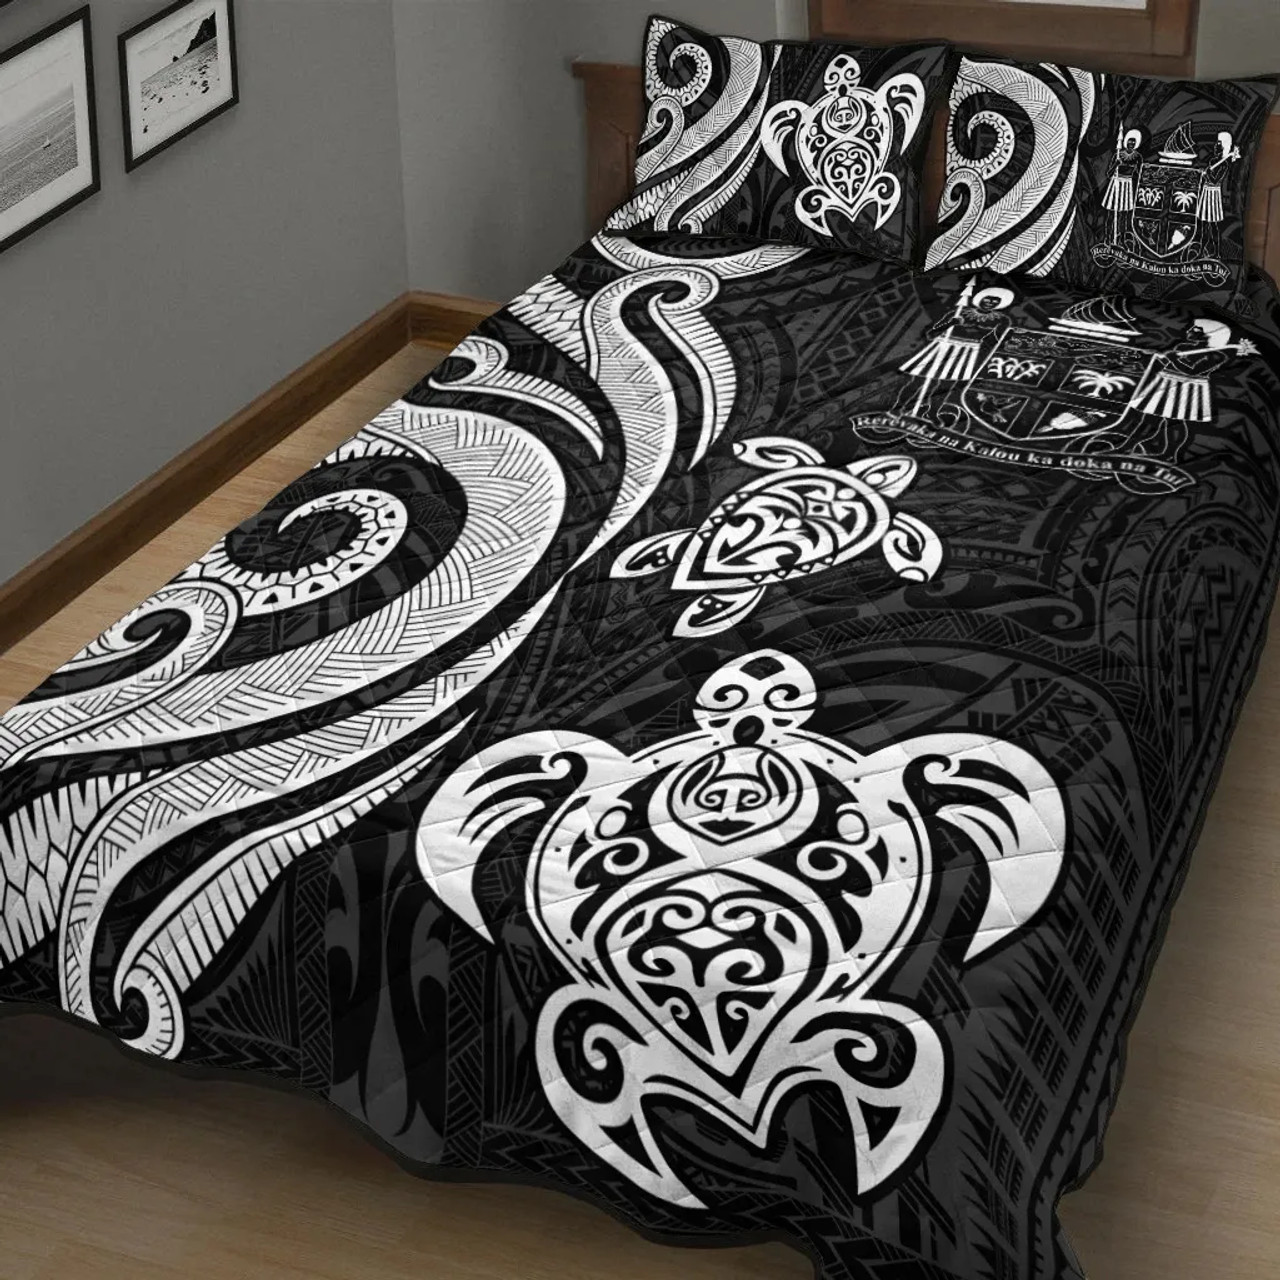 Fiji Quilt Bed Set - White Tentacle Turtle Crest 2